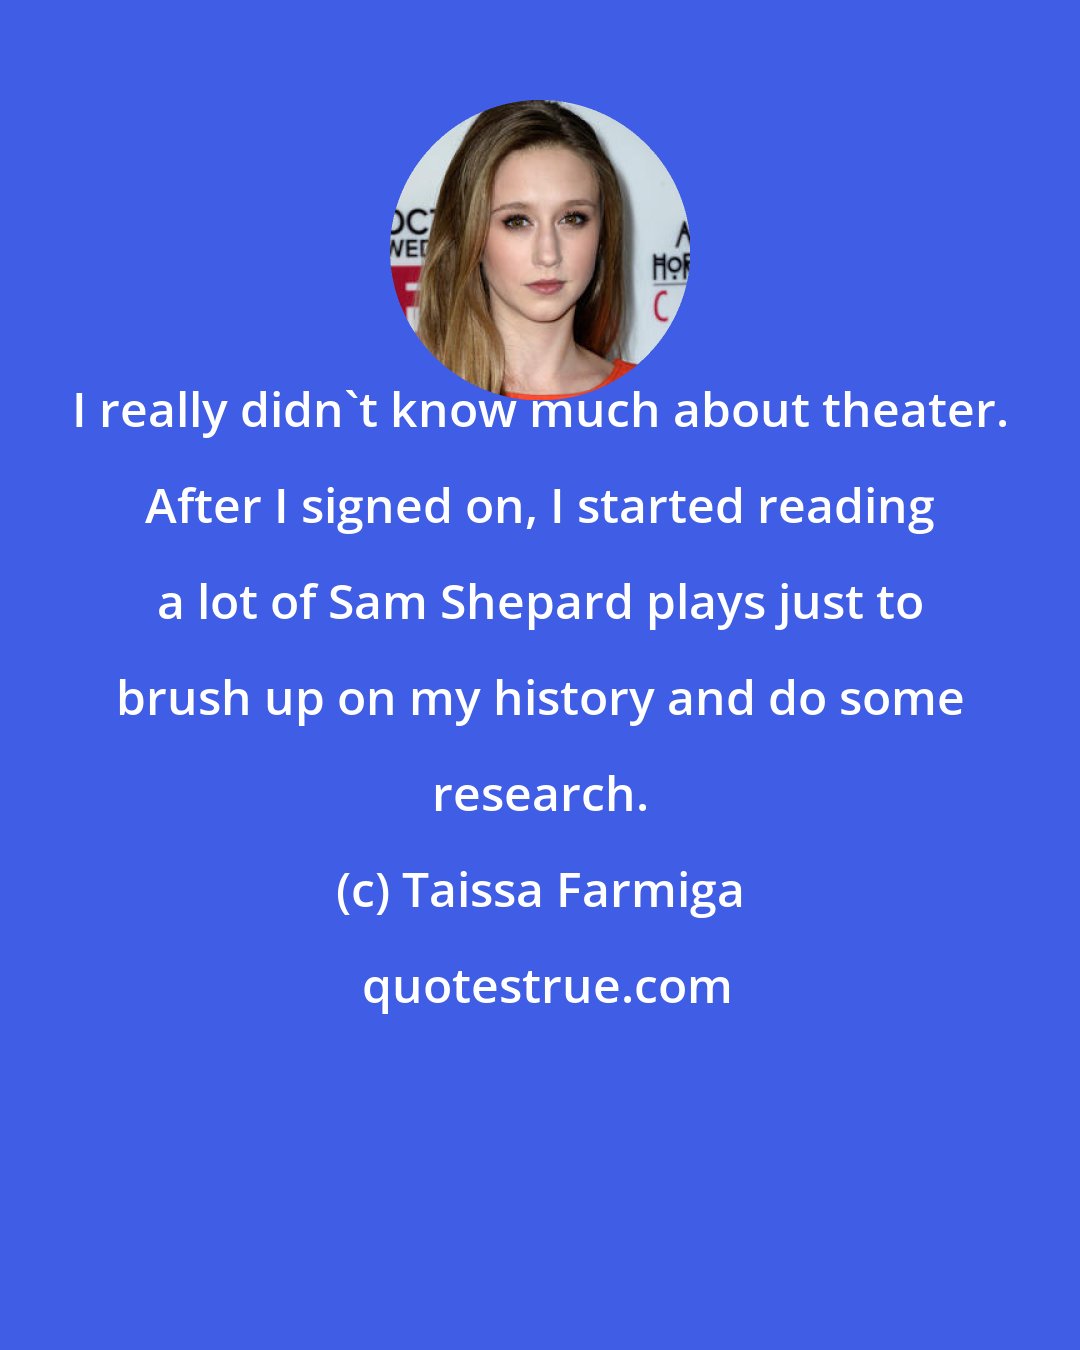 Taissa Farmiga: I really didn't know much about theater. After I signed on, I started reading a lot of Sam Shepard plays just to brush up on my history and do some research.